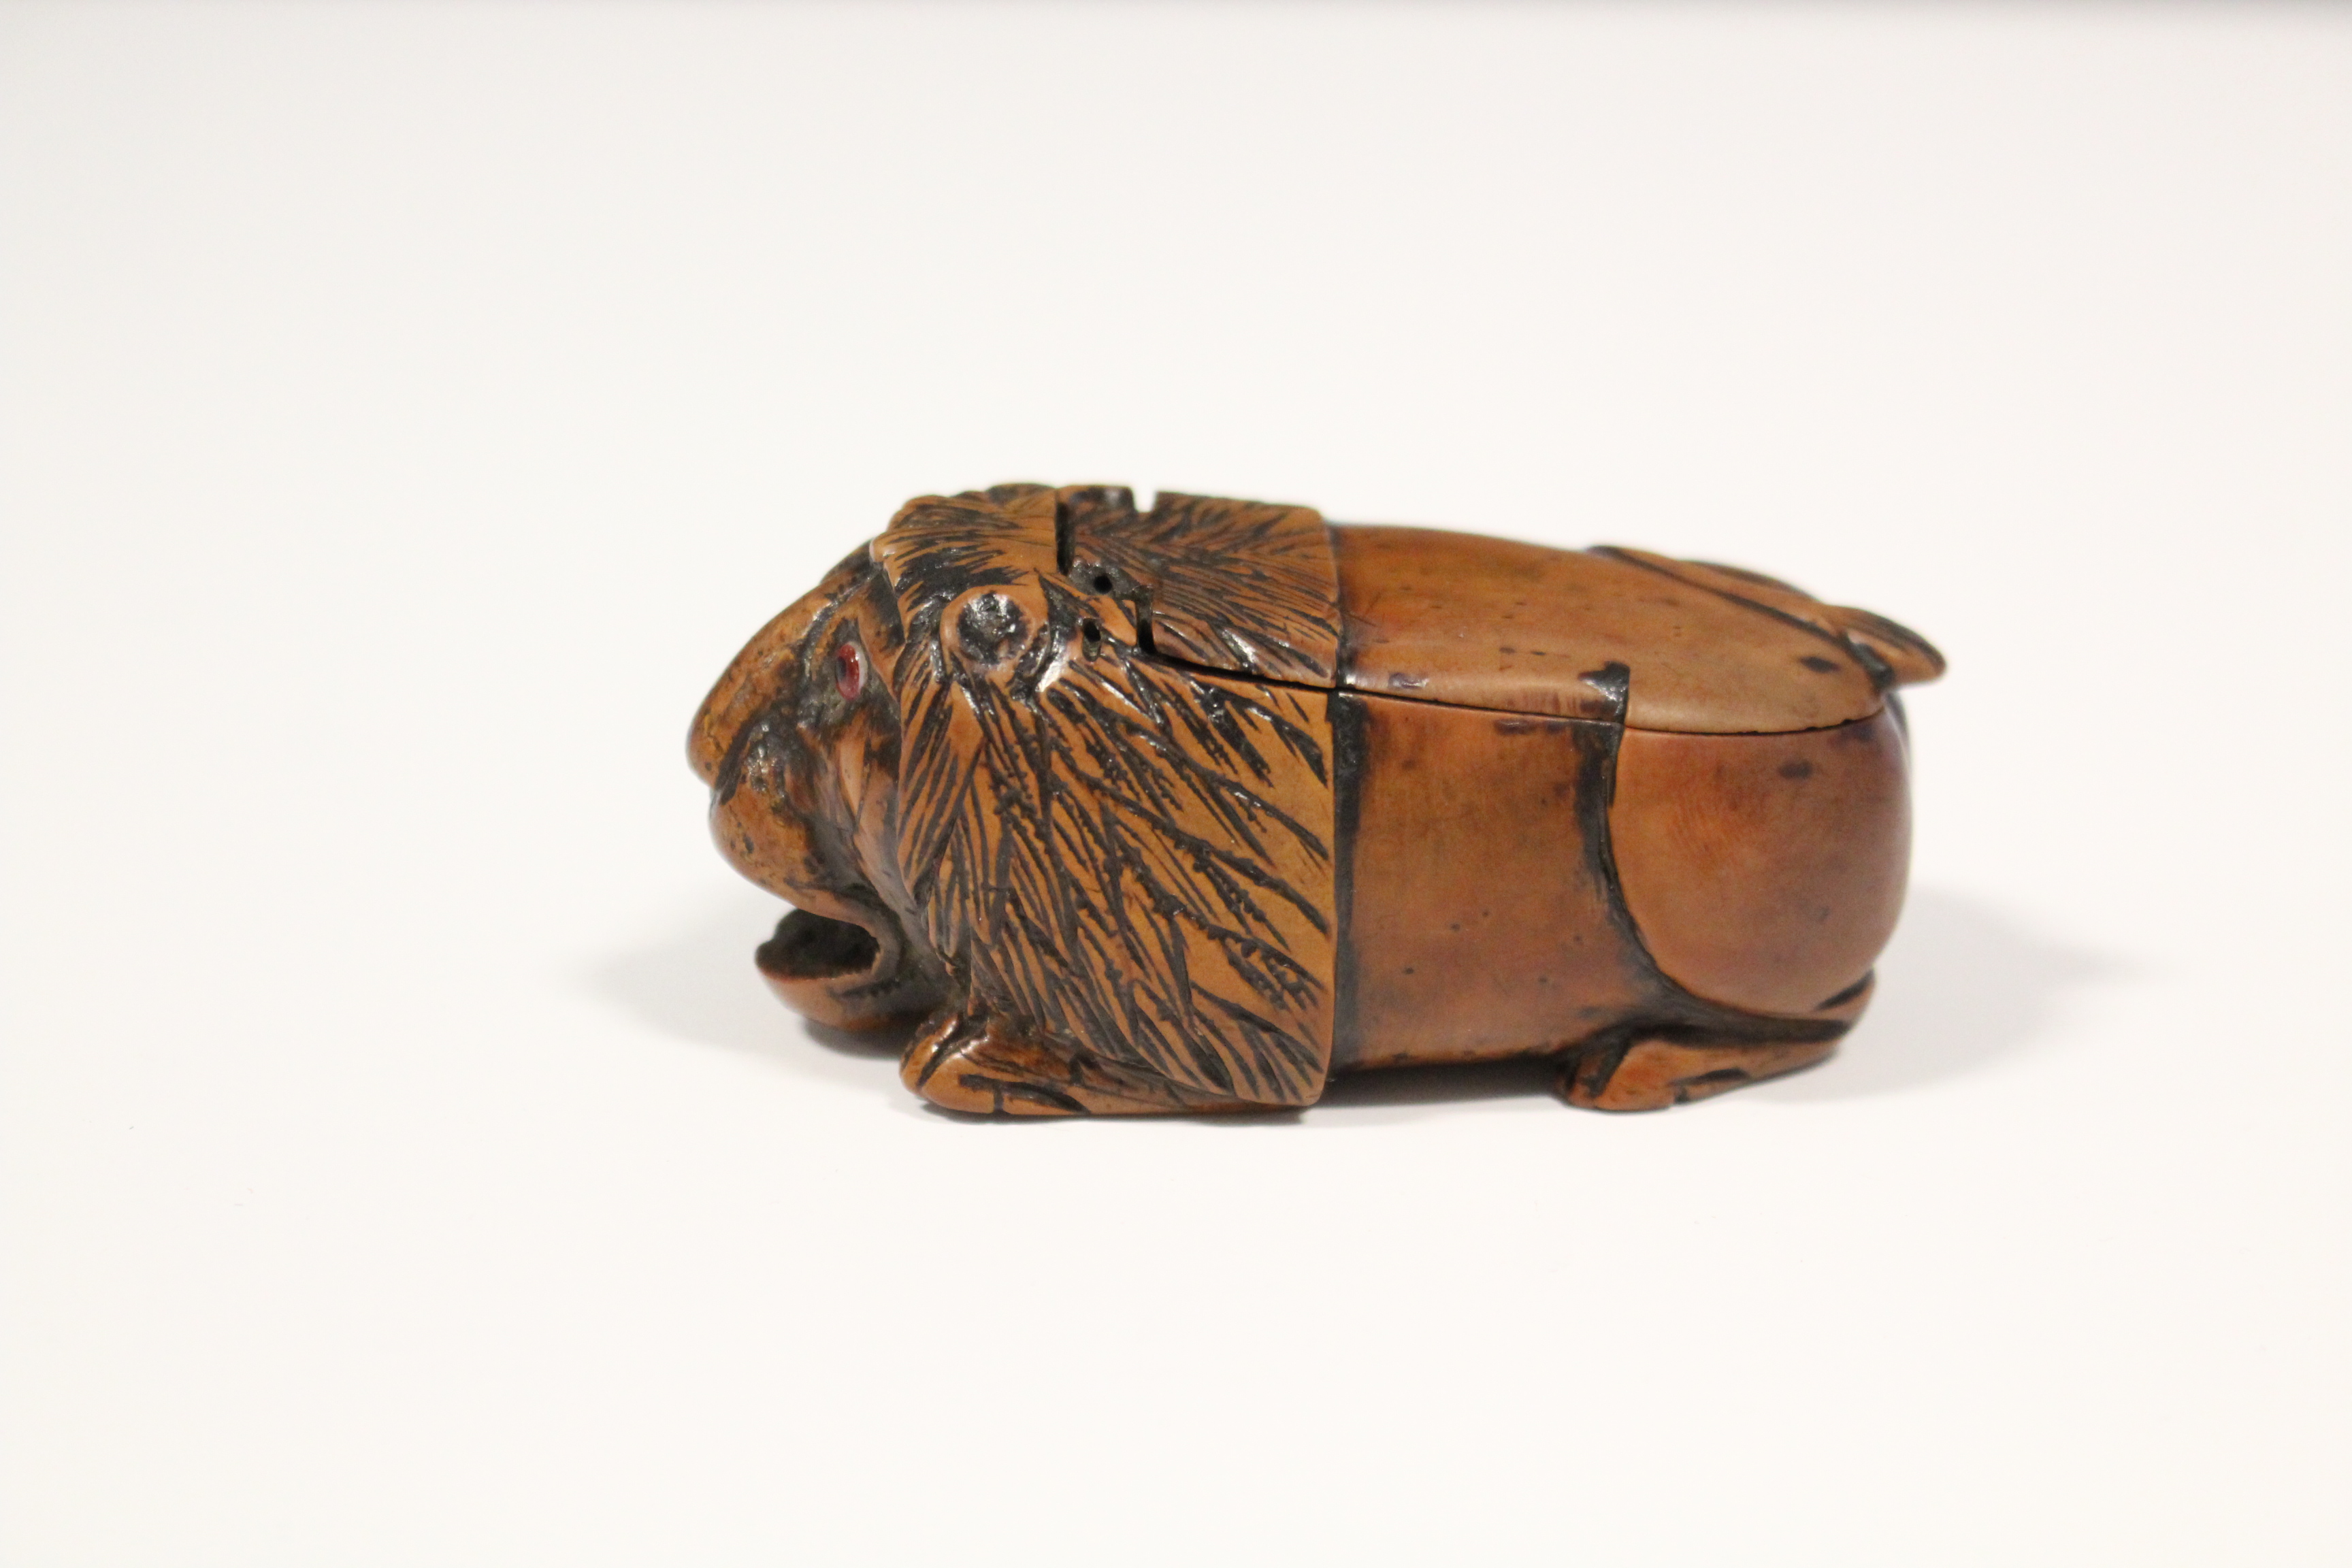 A 19th century coquilla-nut snuff box carved in the form of a crouching lion, with inset glass - Image 4 of 6